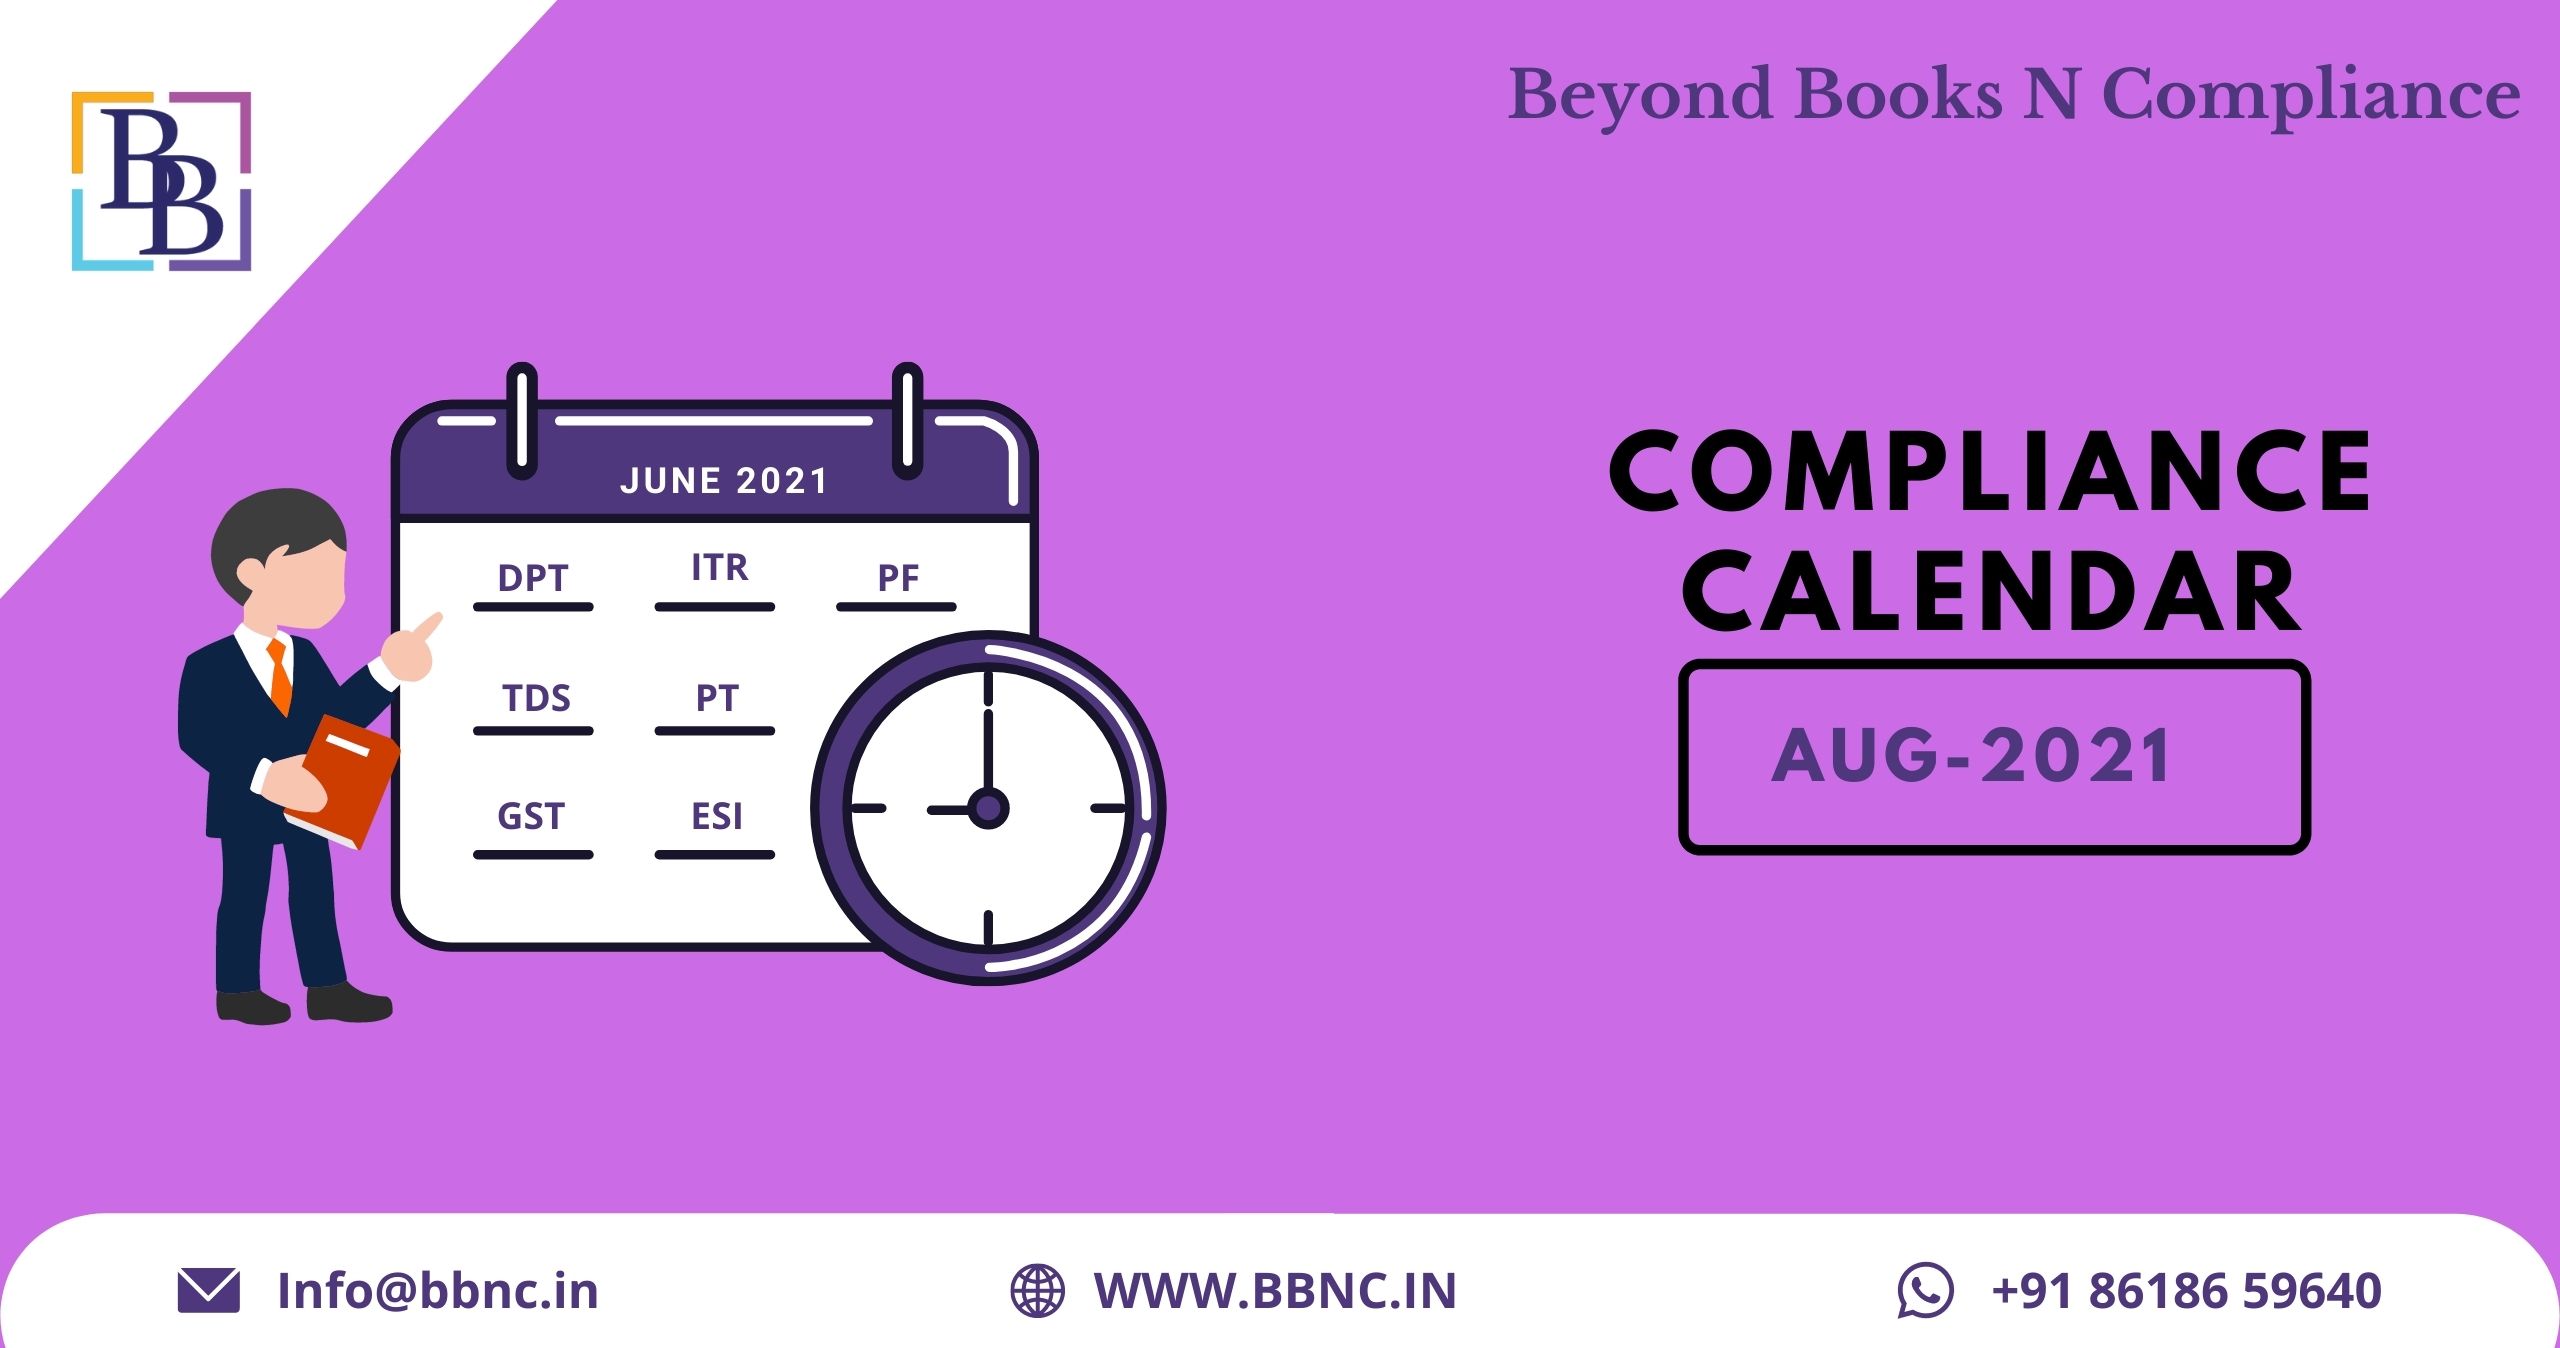 List of compliance due dates in August 2021